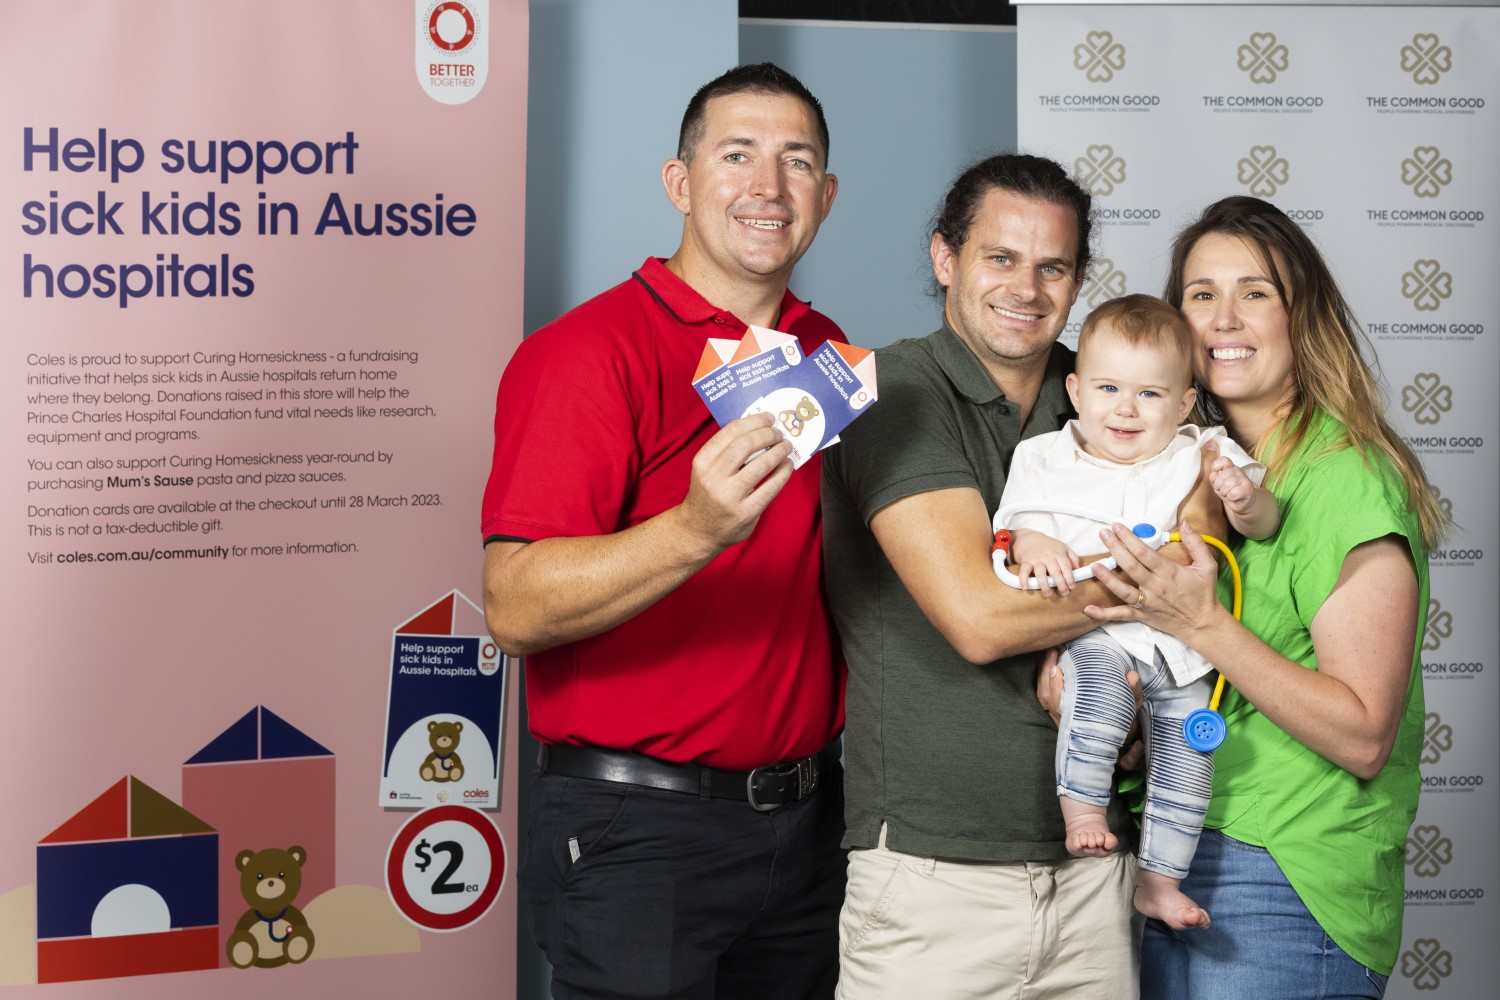 Funds raised will help children like Hamish, pictured with parents Richard & Tiffany Kightley and Coles Regional Manager Brad Stewart